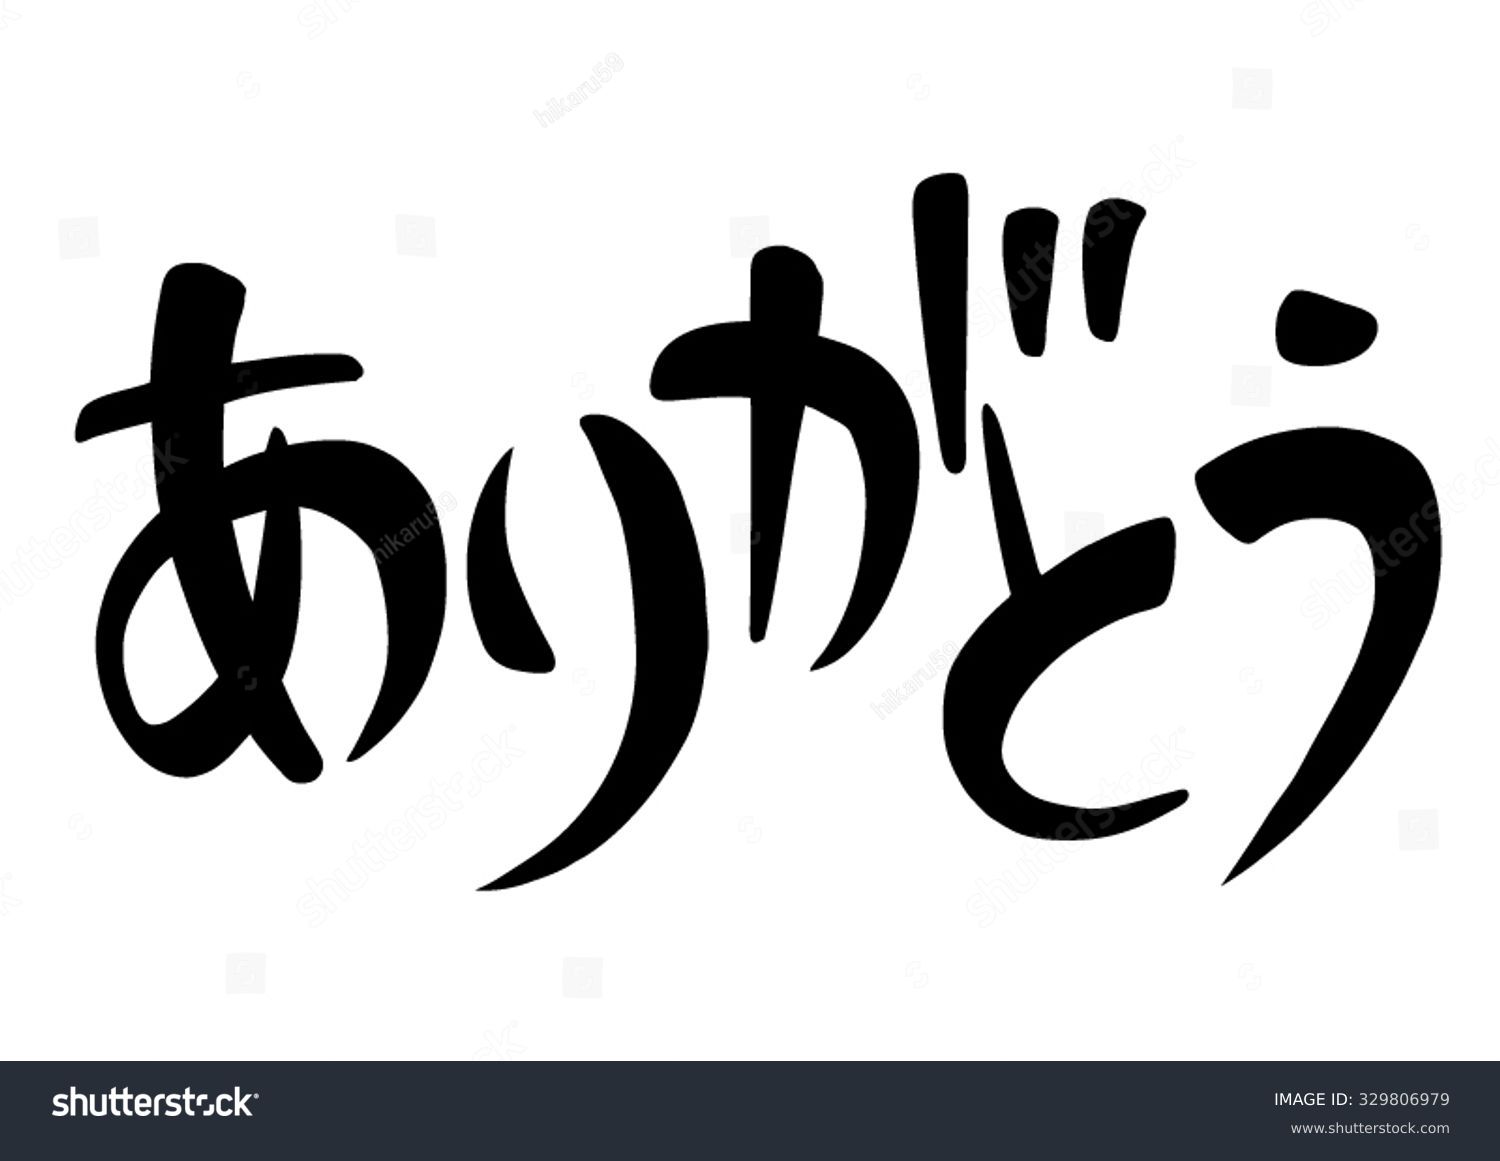 Thank You In Japanese Google Translate